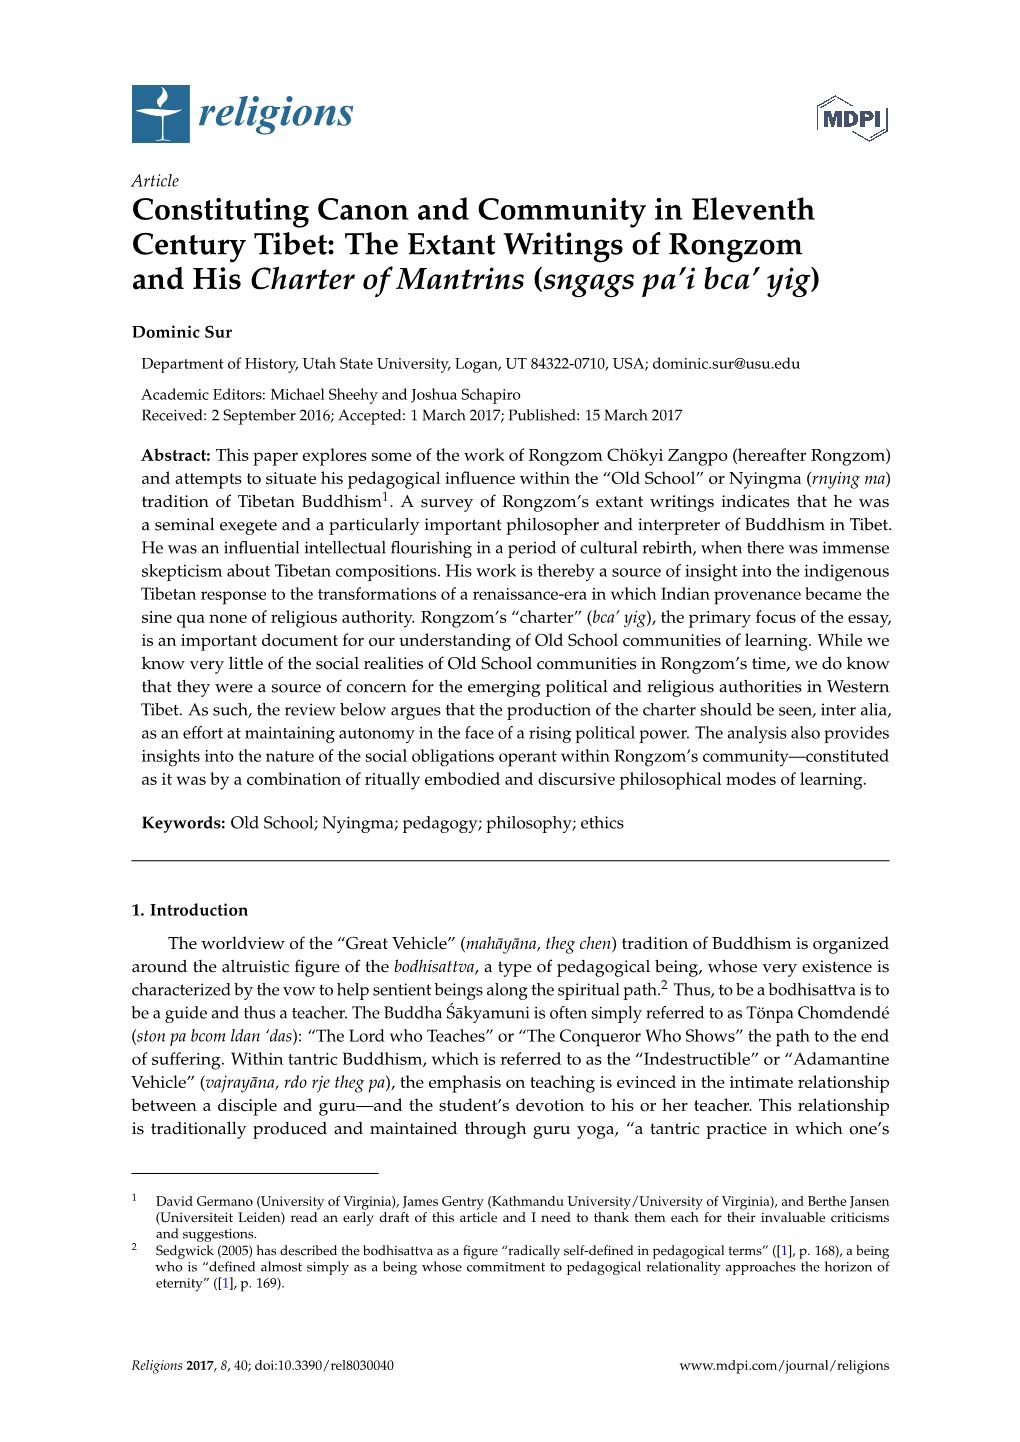 Constituting Canon and Community in Eleventh Century Tibet: the Extant Writings of Rongzom and His Charter of Mantrins (Sngags Pa’I Bca’ Yig)